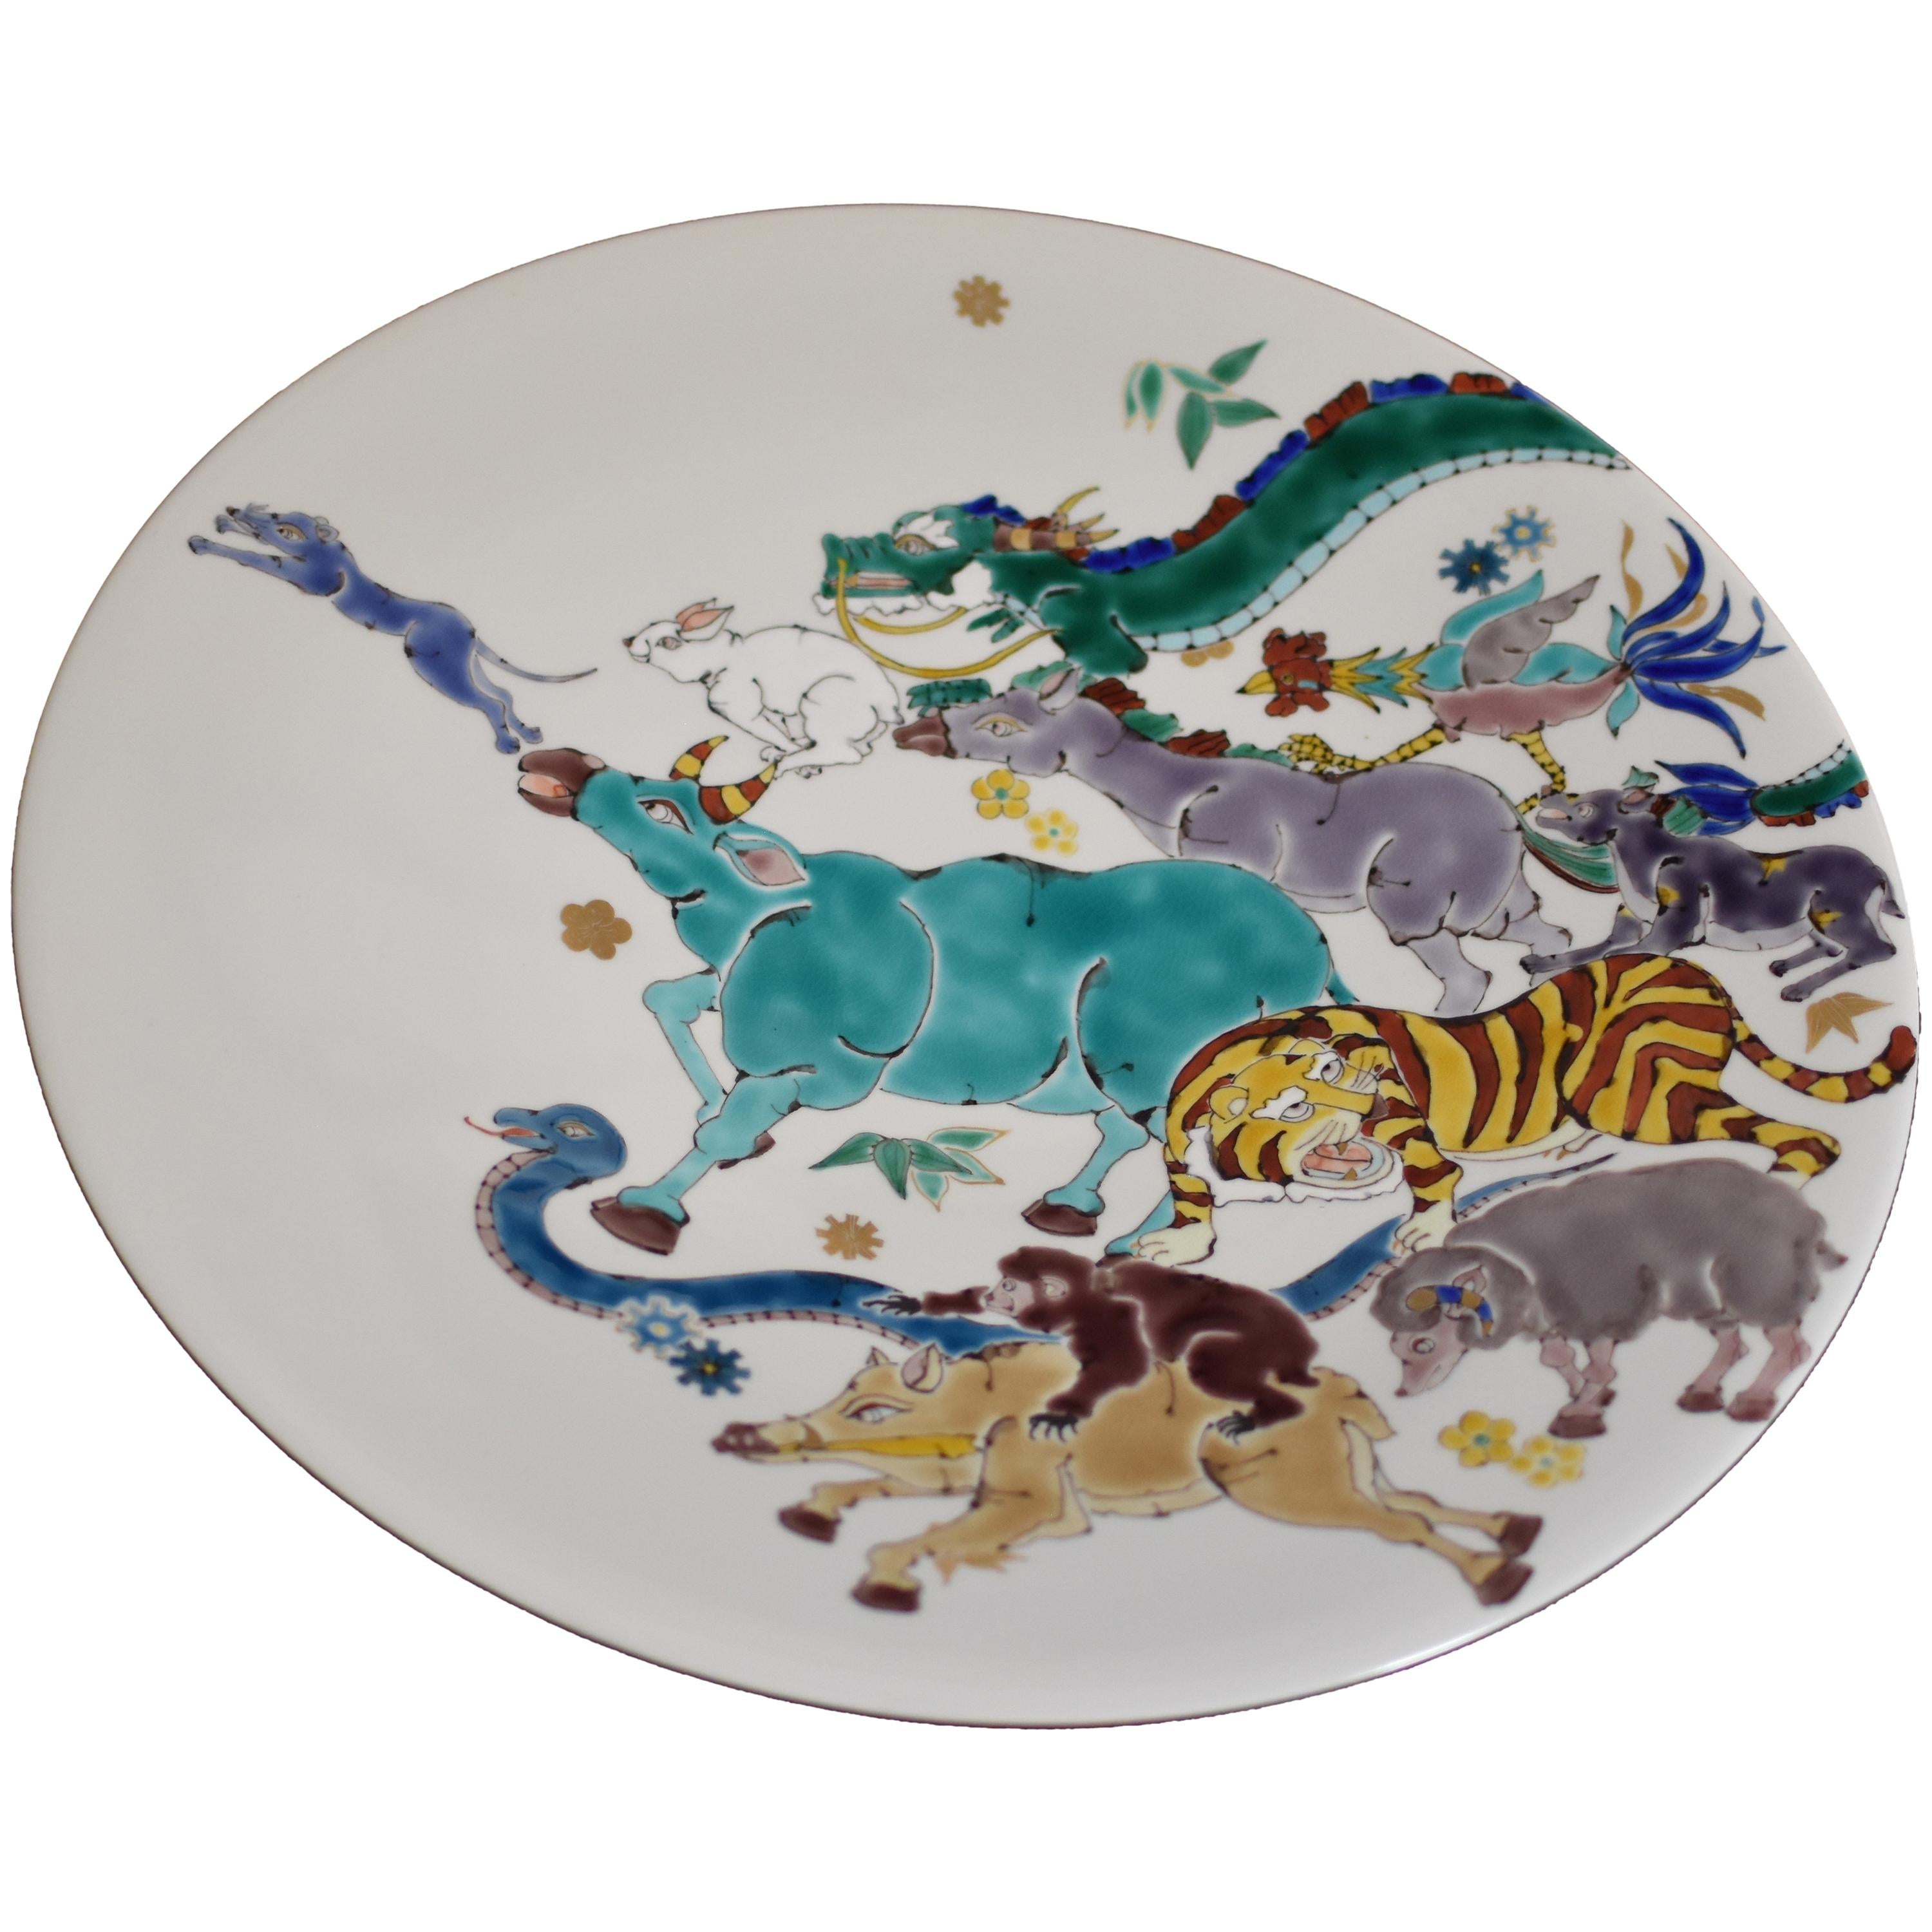 Large Contemporary Japanese Kutani Porcelain Charger by Master Artist